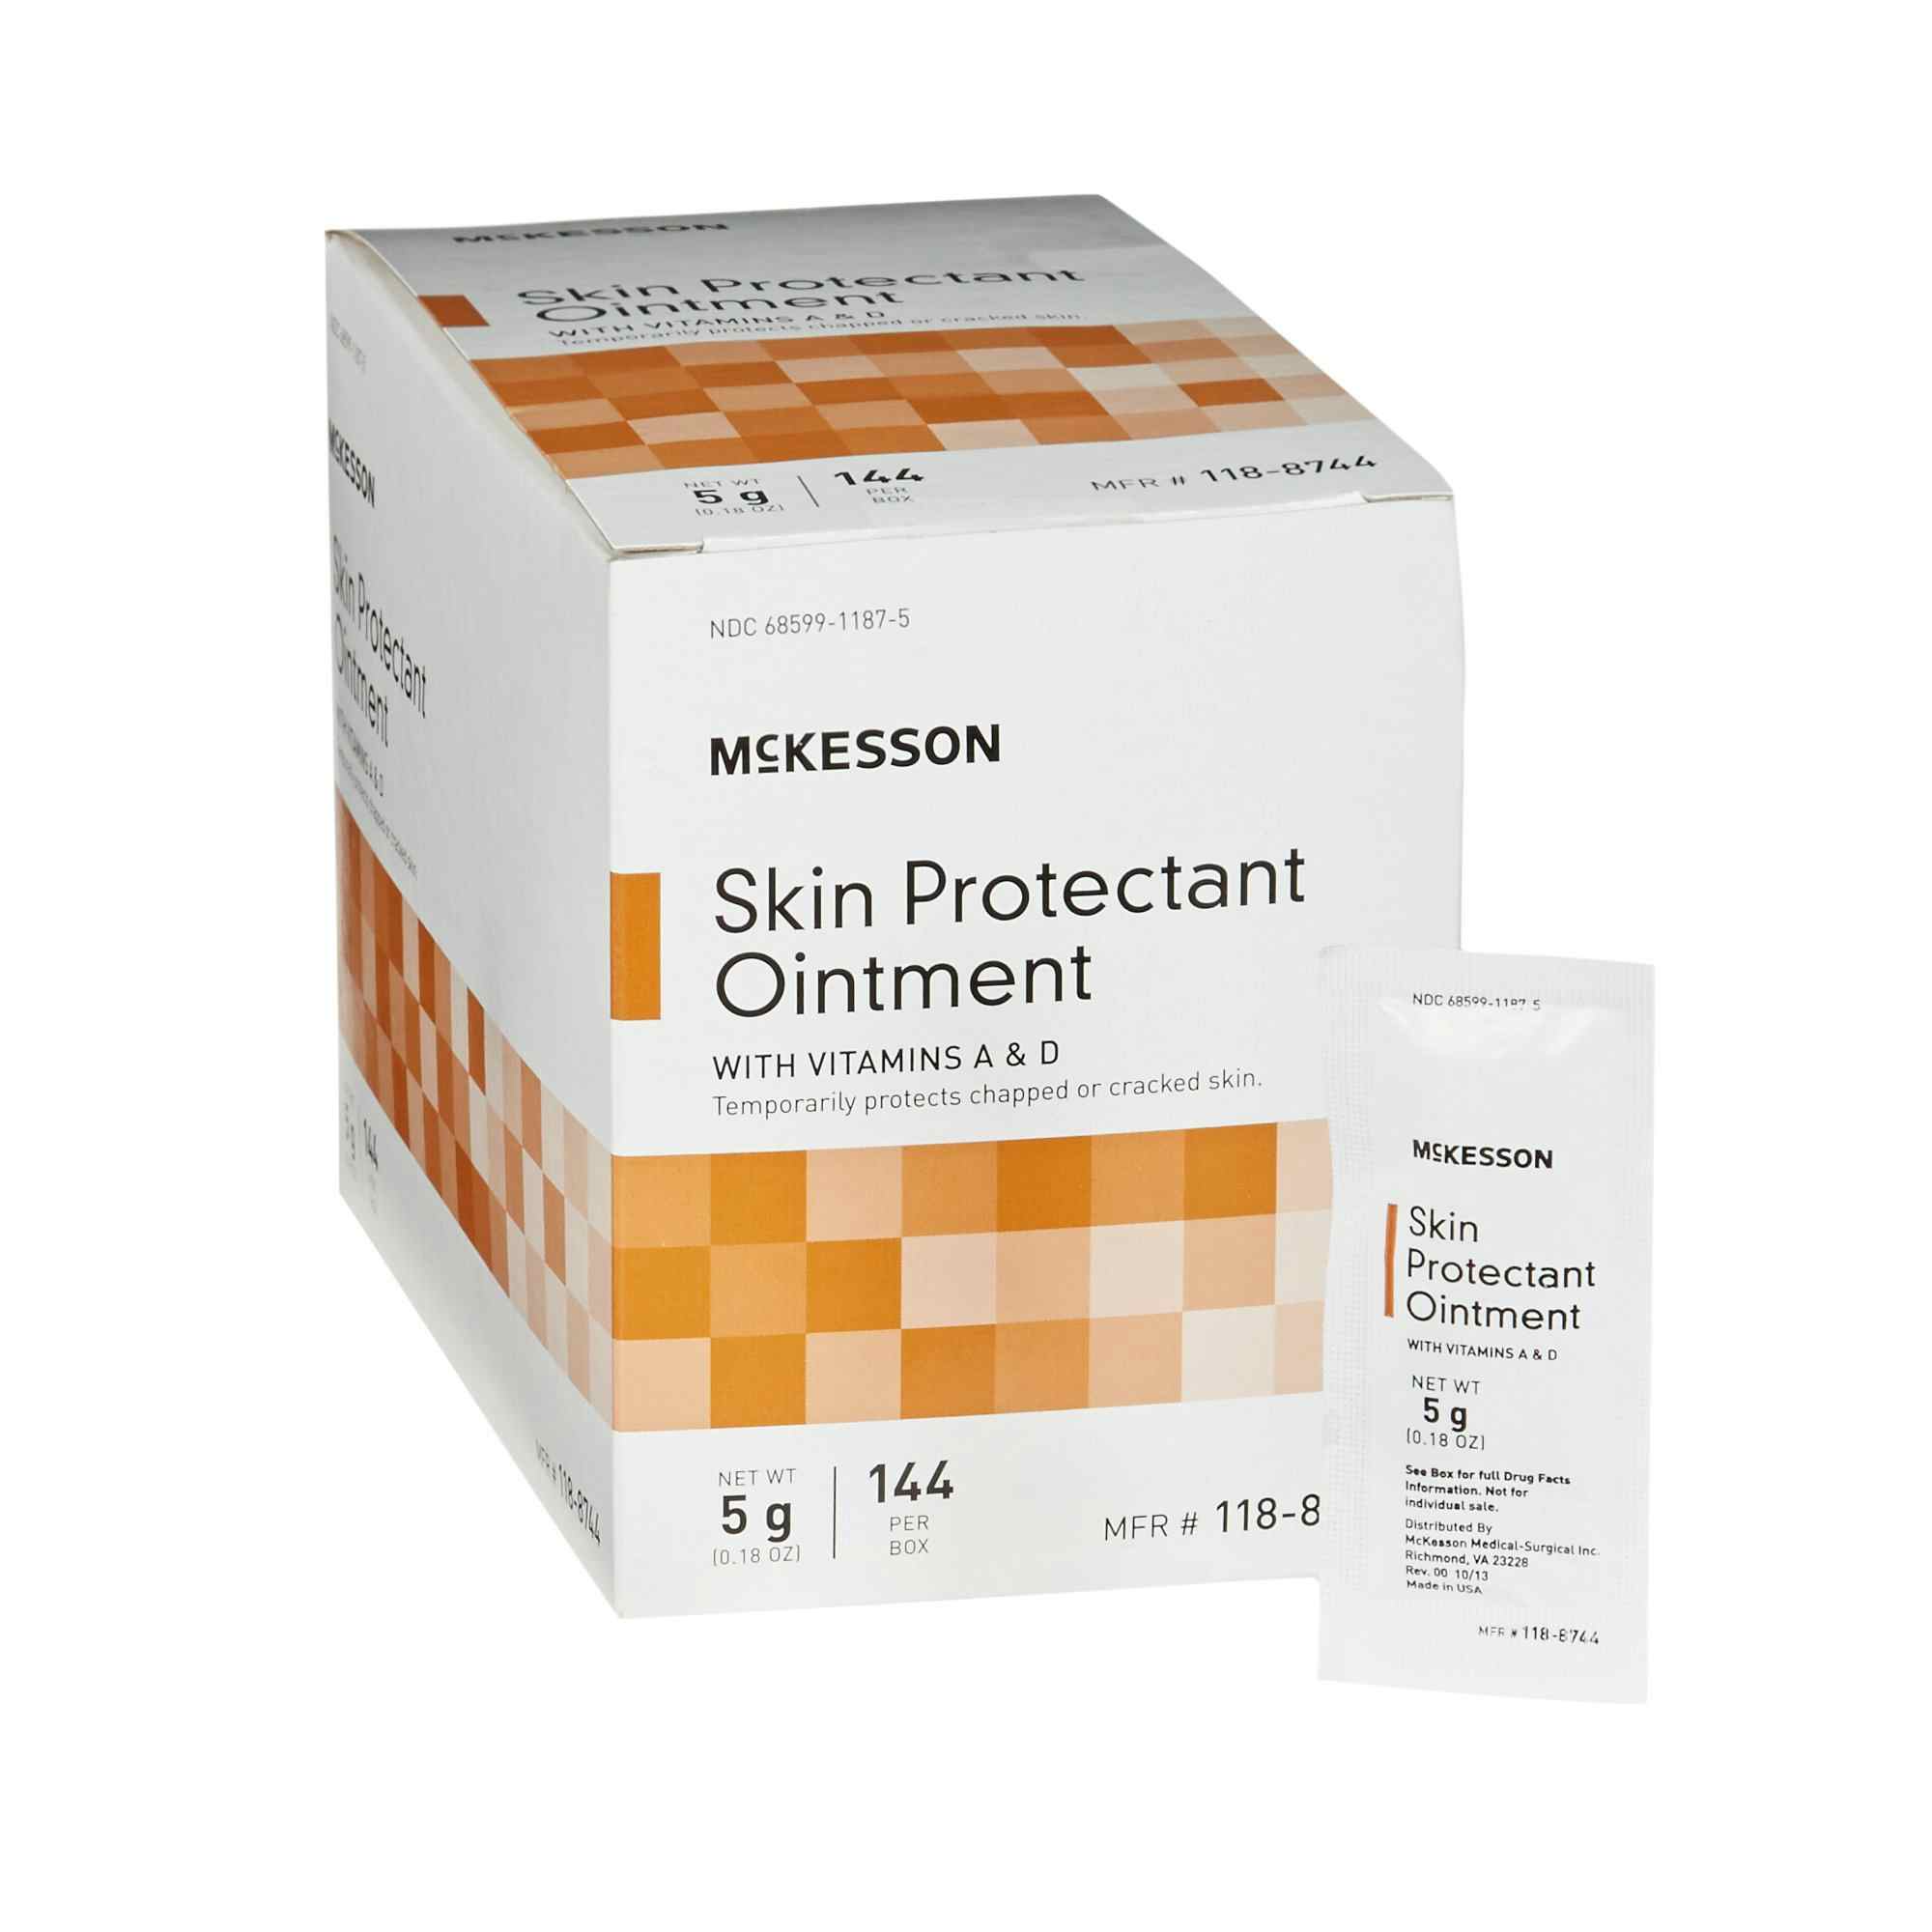 McKesson Skin Protectant Ointment